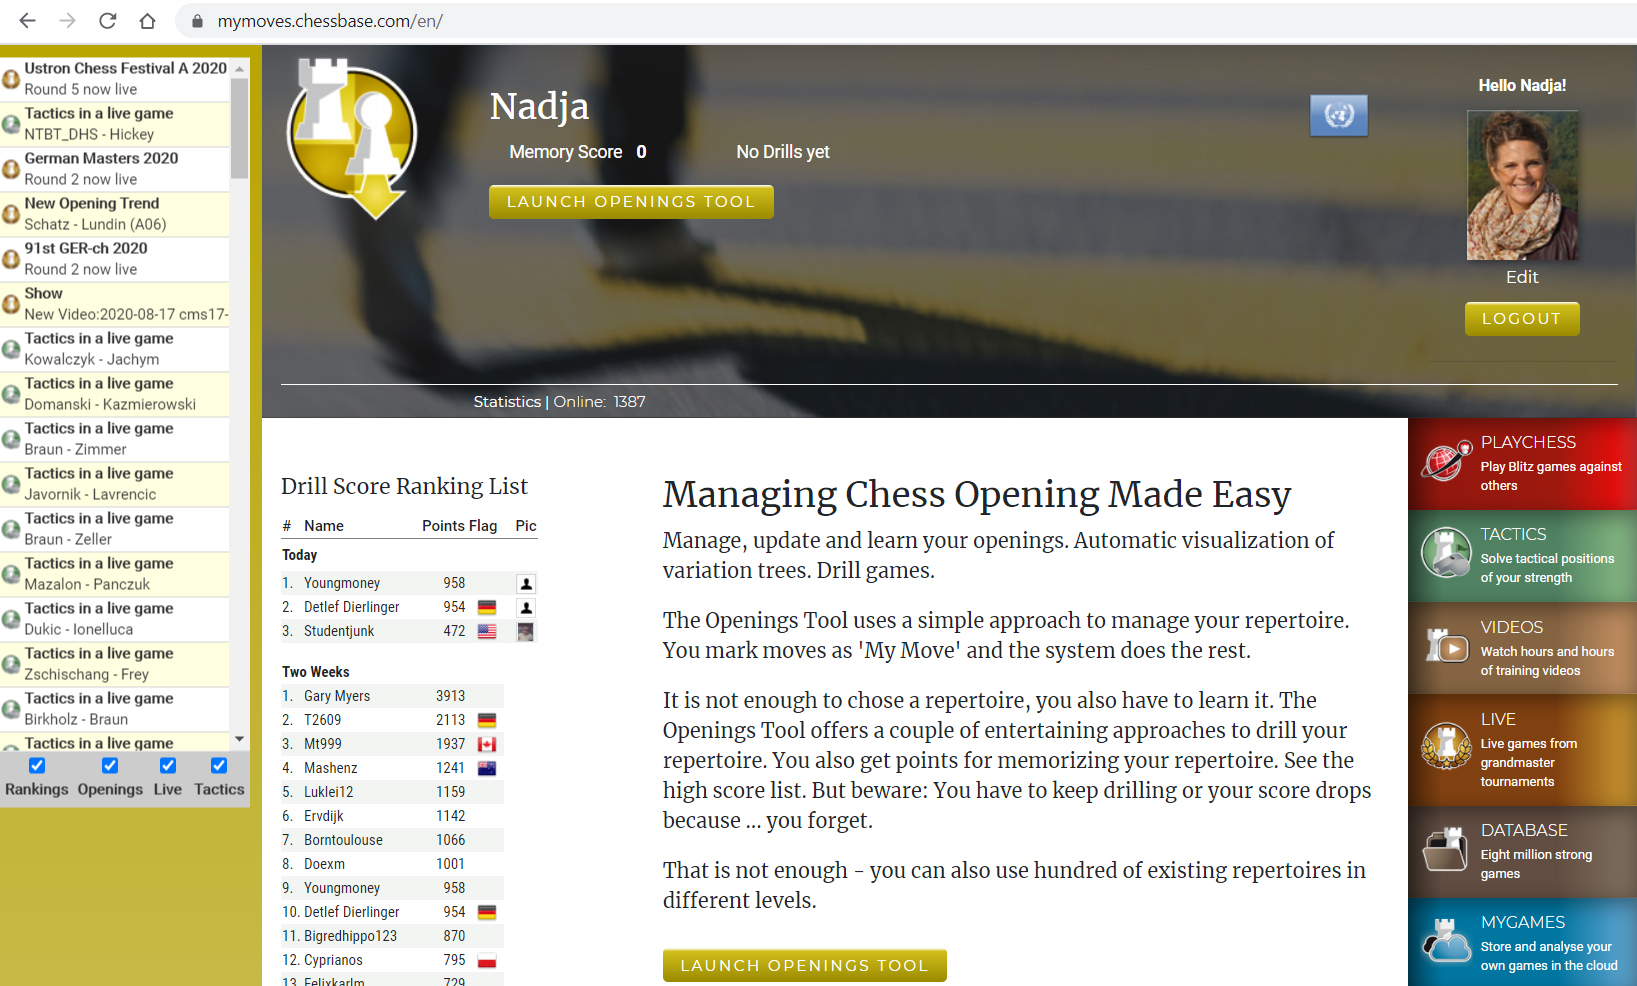 Opening training in the ChessBase Account web app